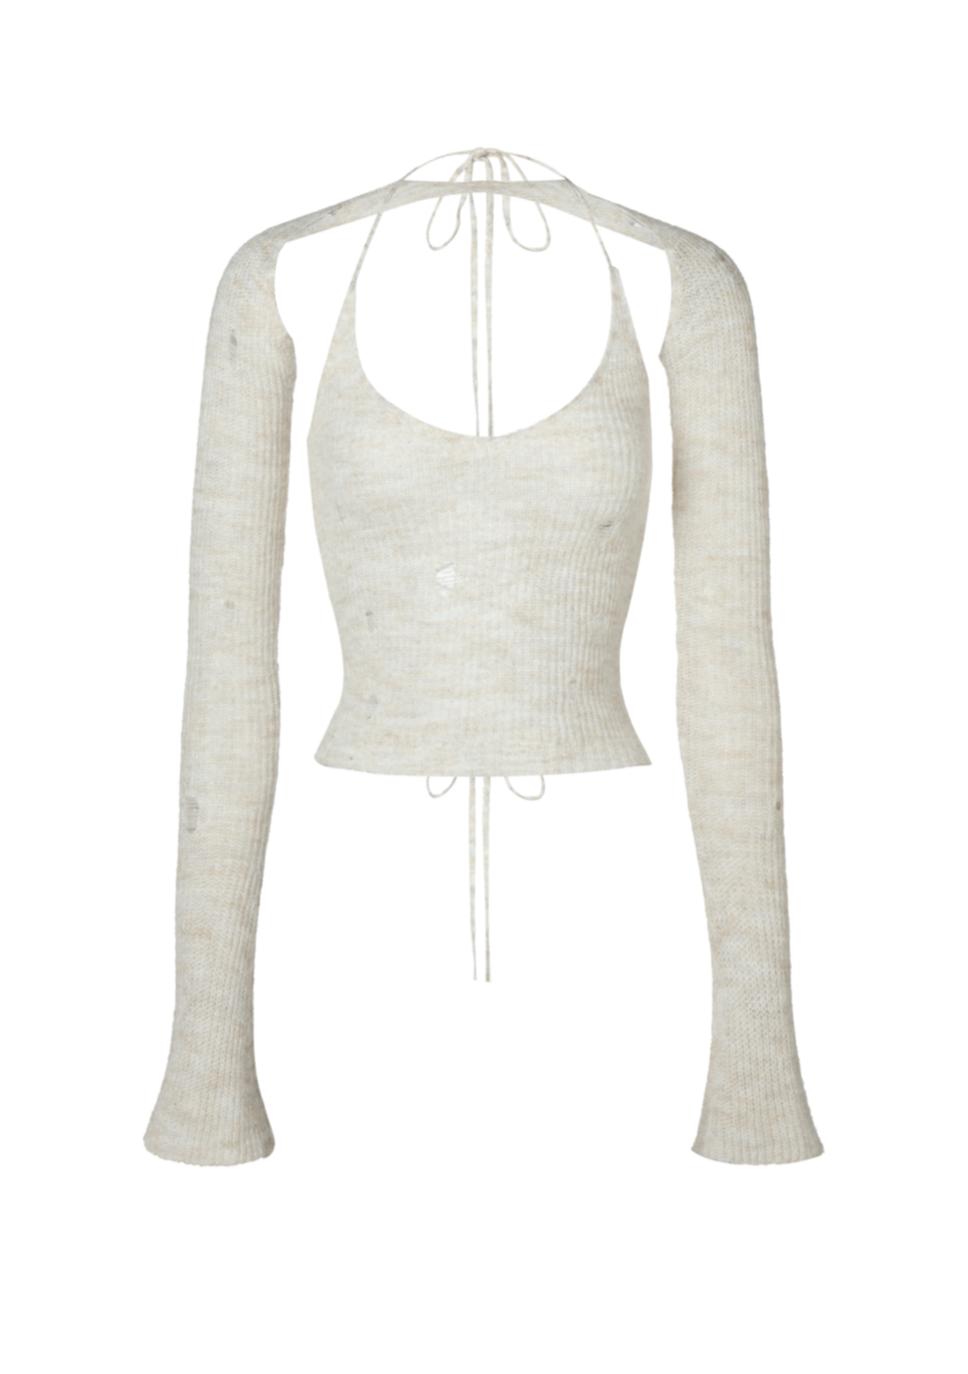 CSFC Label "Echo" Two-Piece Backless lace up Knit Top（Oats white）